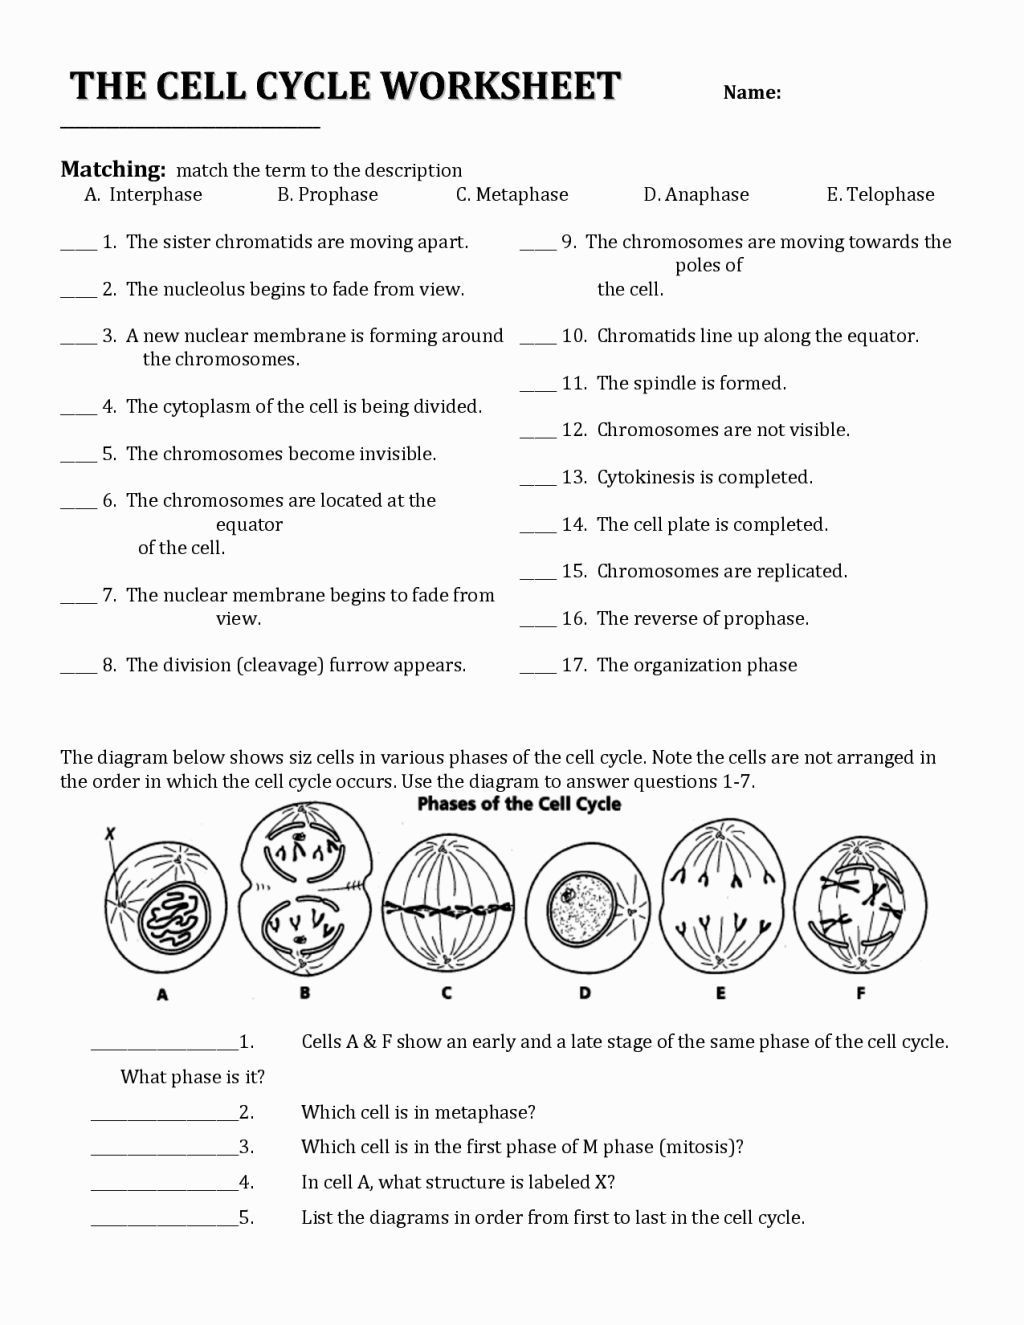 Cycles Worksheet Answer Key the Cell Cycle Coloring Worksheet Key